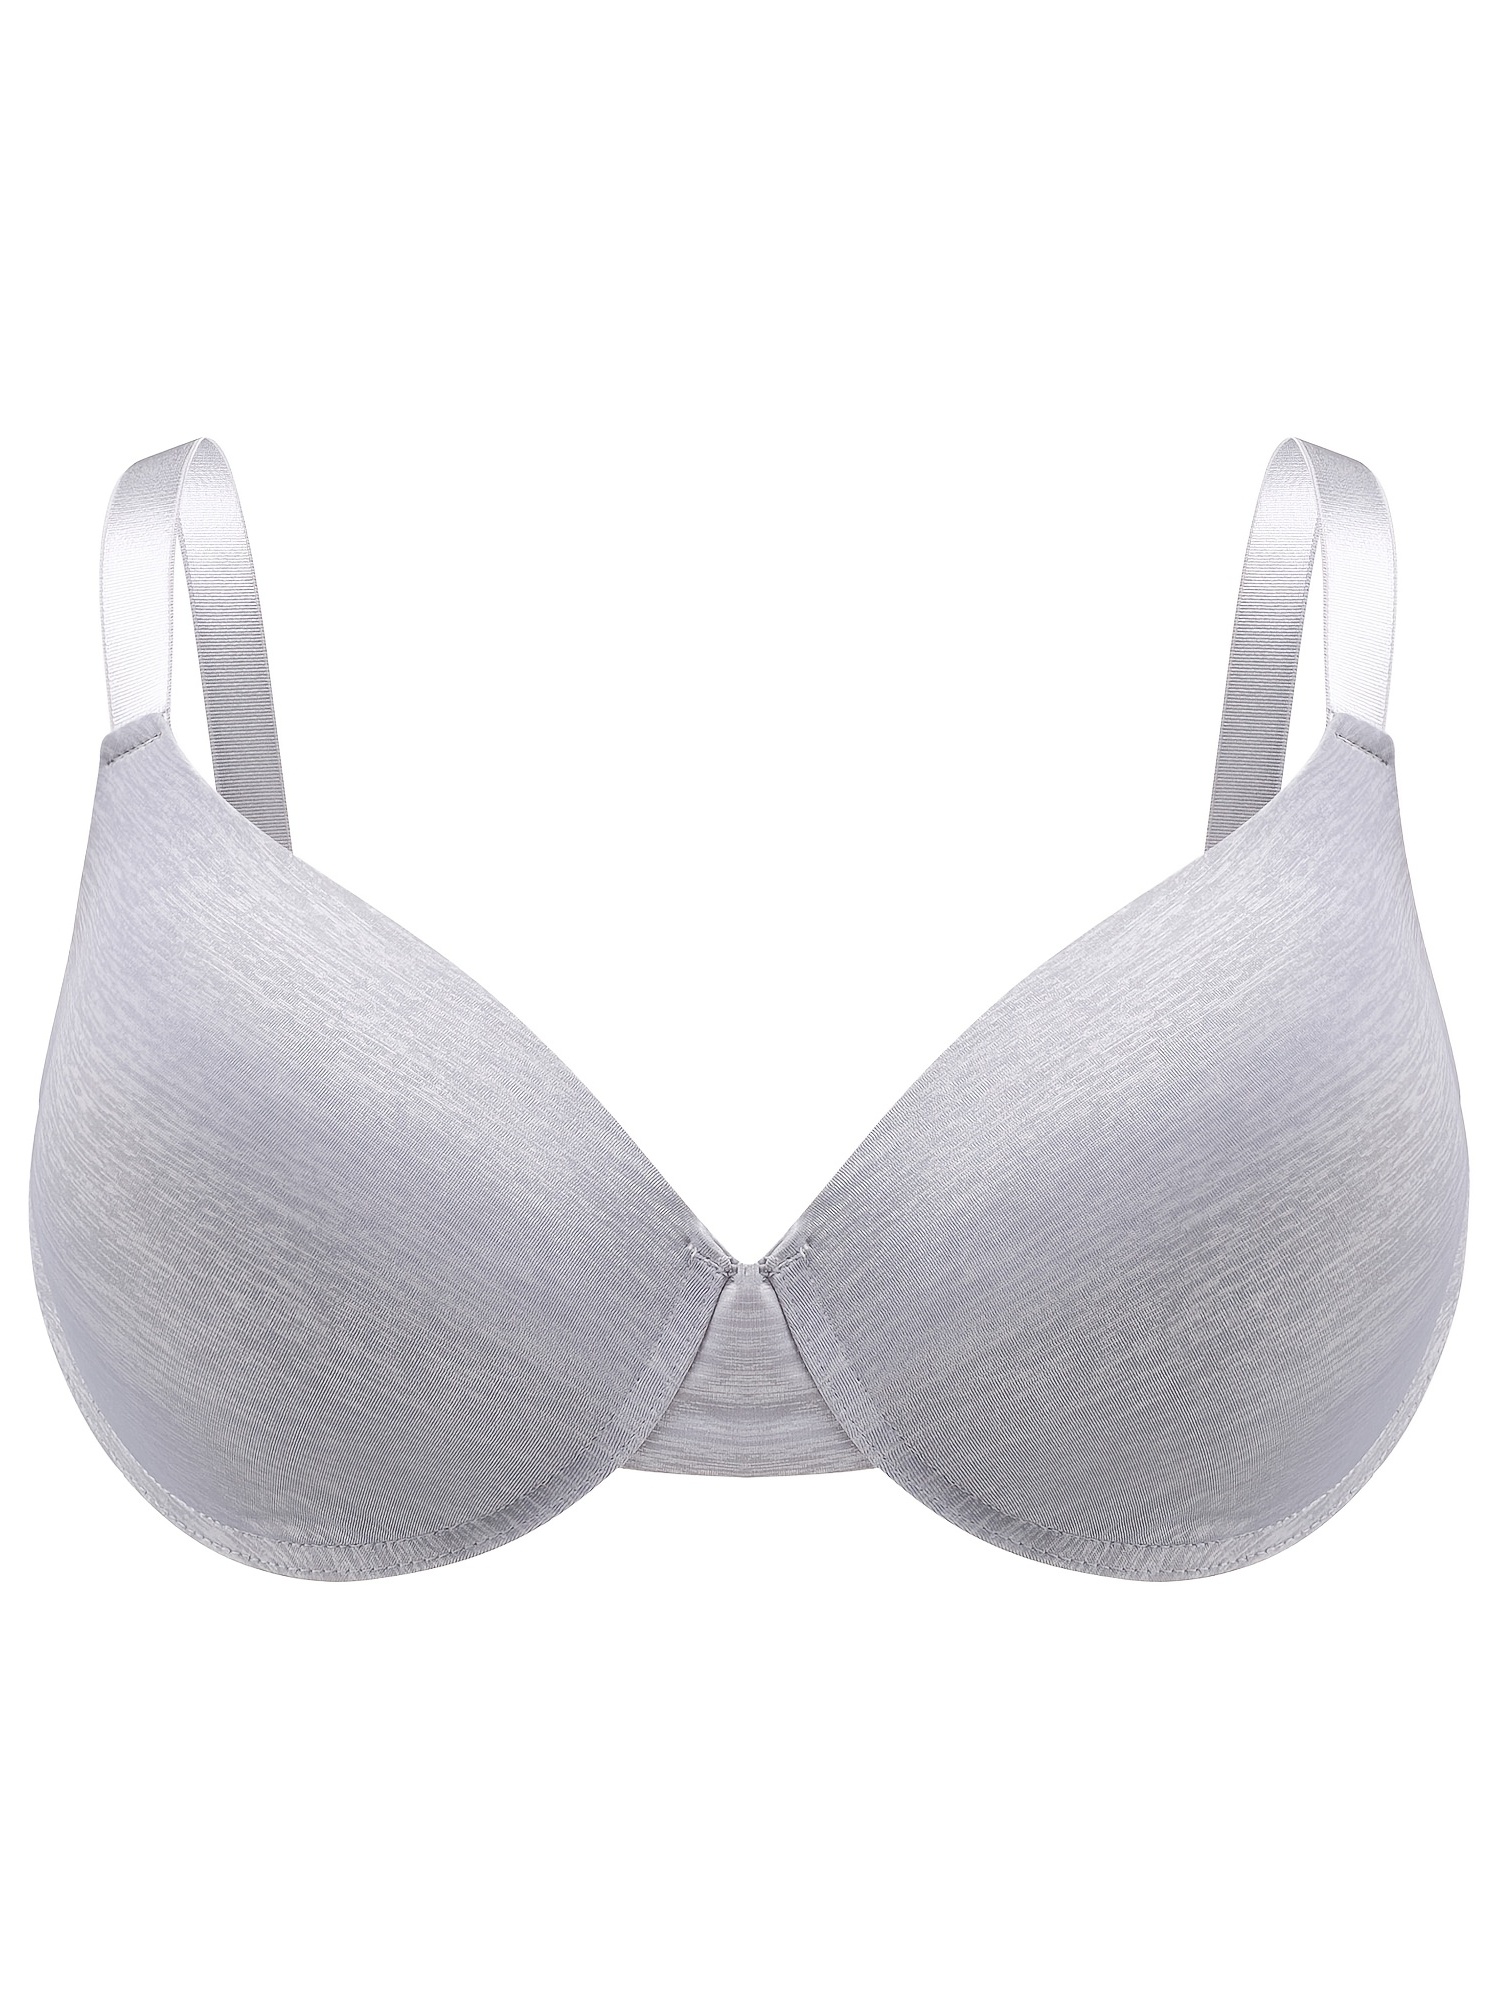 Size 42DD Supportive Plus Size Bras For Women